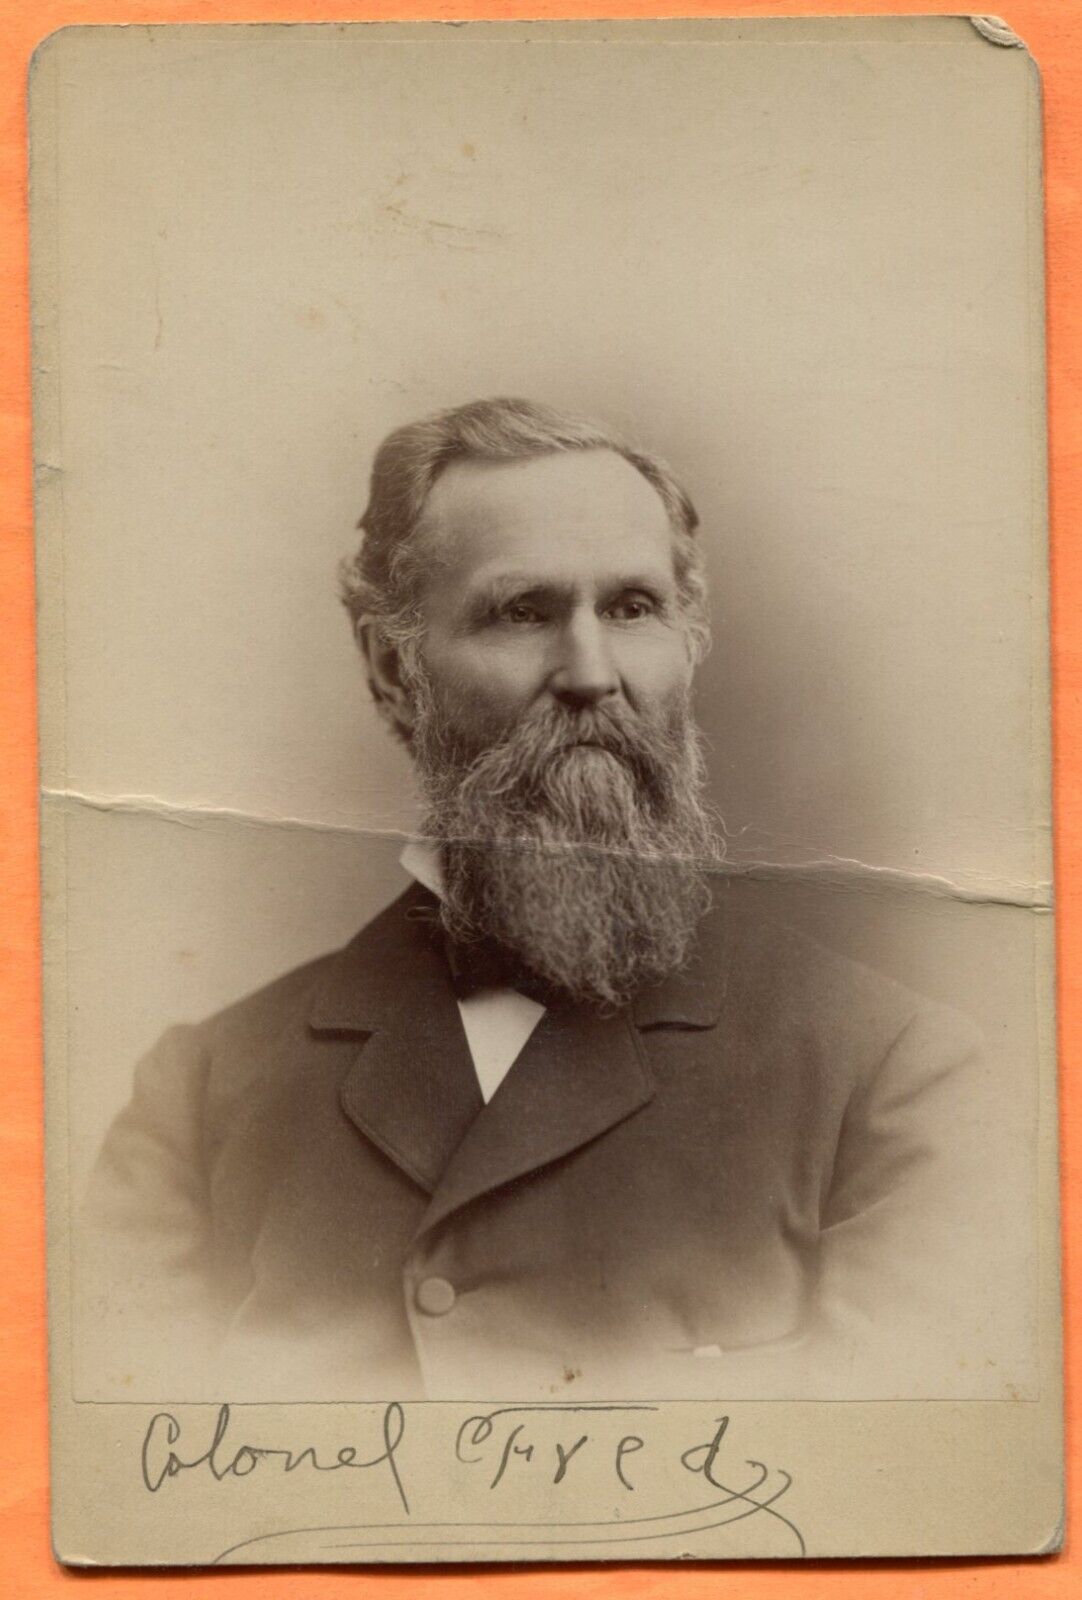 Portrait of a Bearded Man Colonel Fred circa 1880s Old Cabinet Card